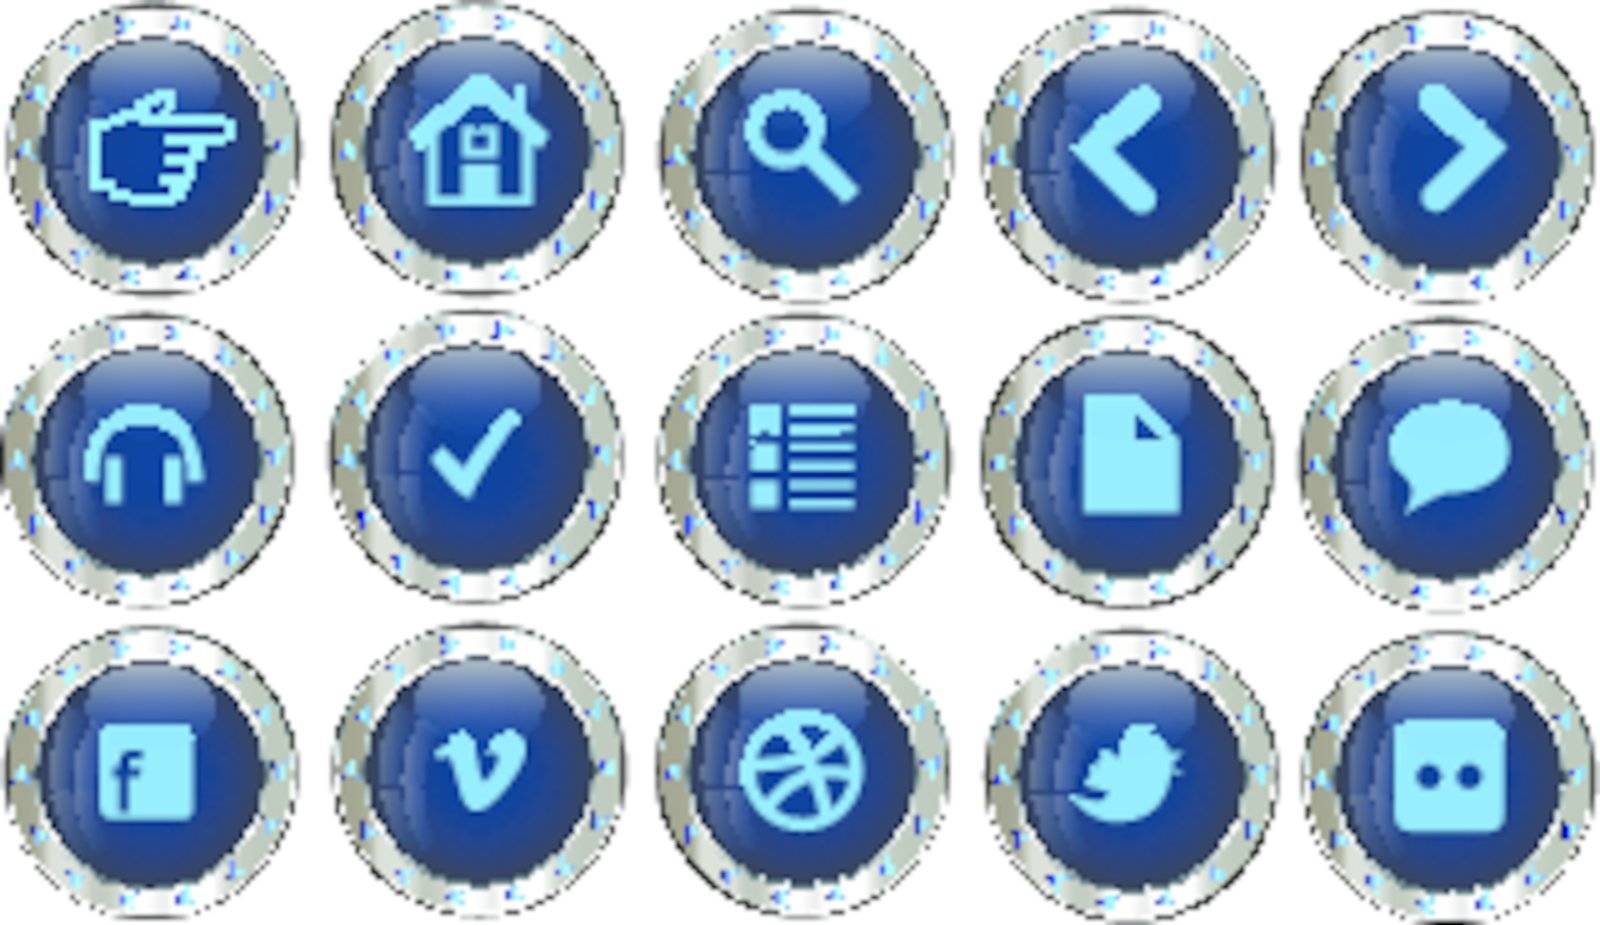 Items in the set are a good fit to be used in web apps considering there are icons of actions, charts, comments, devices, social networking and more.